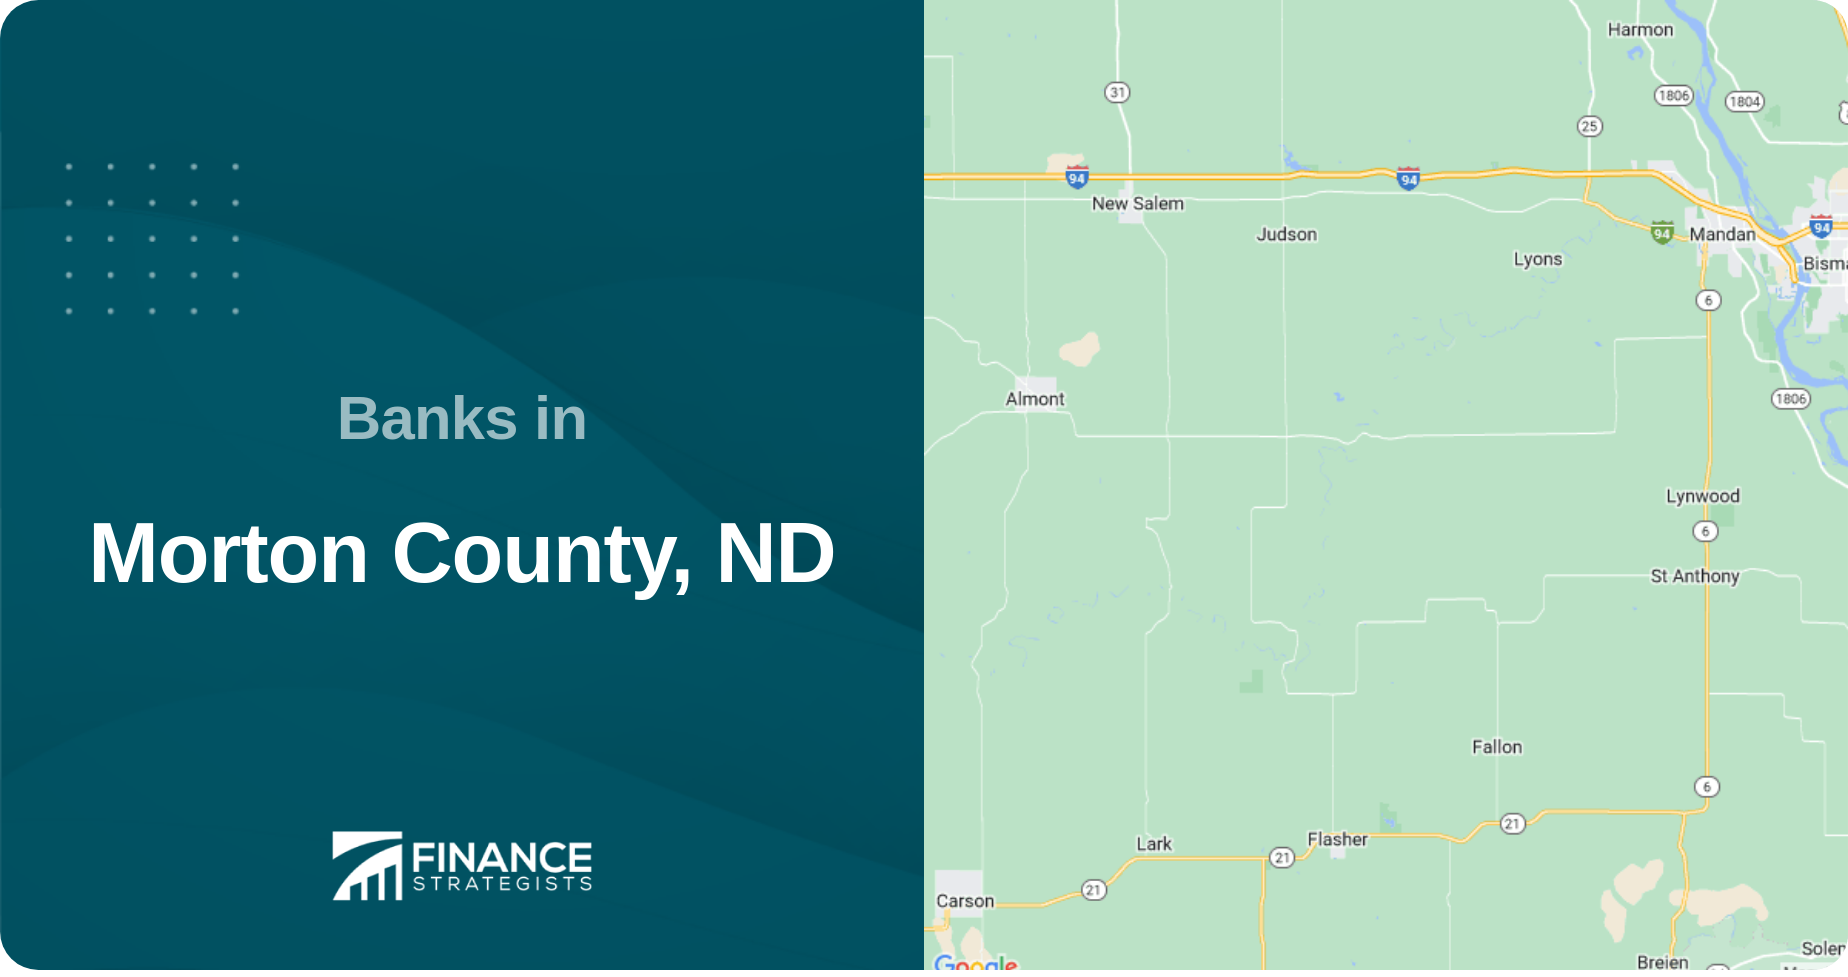 Banks in Morton County, ND